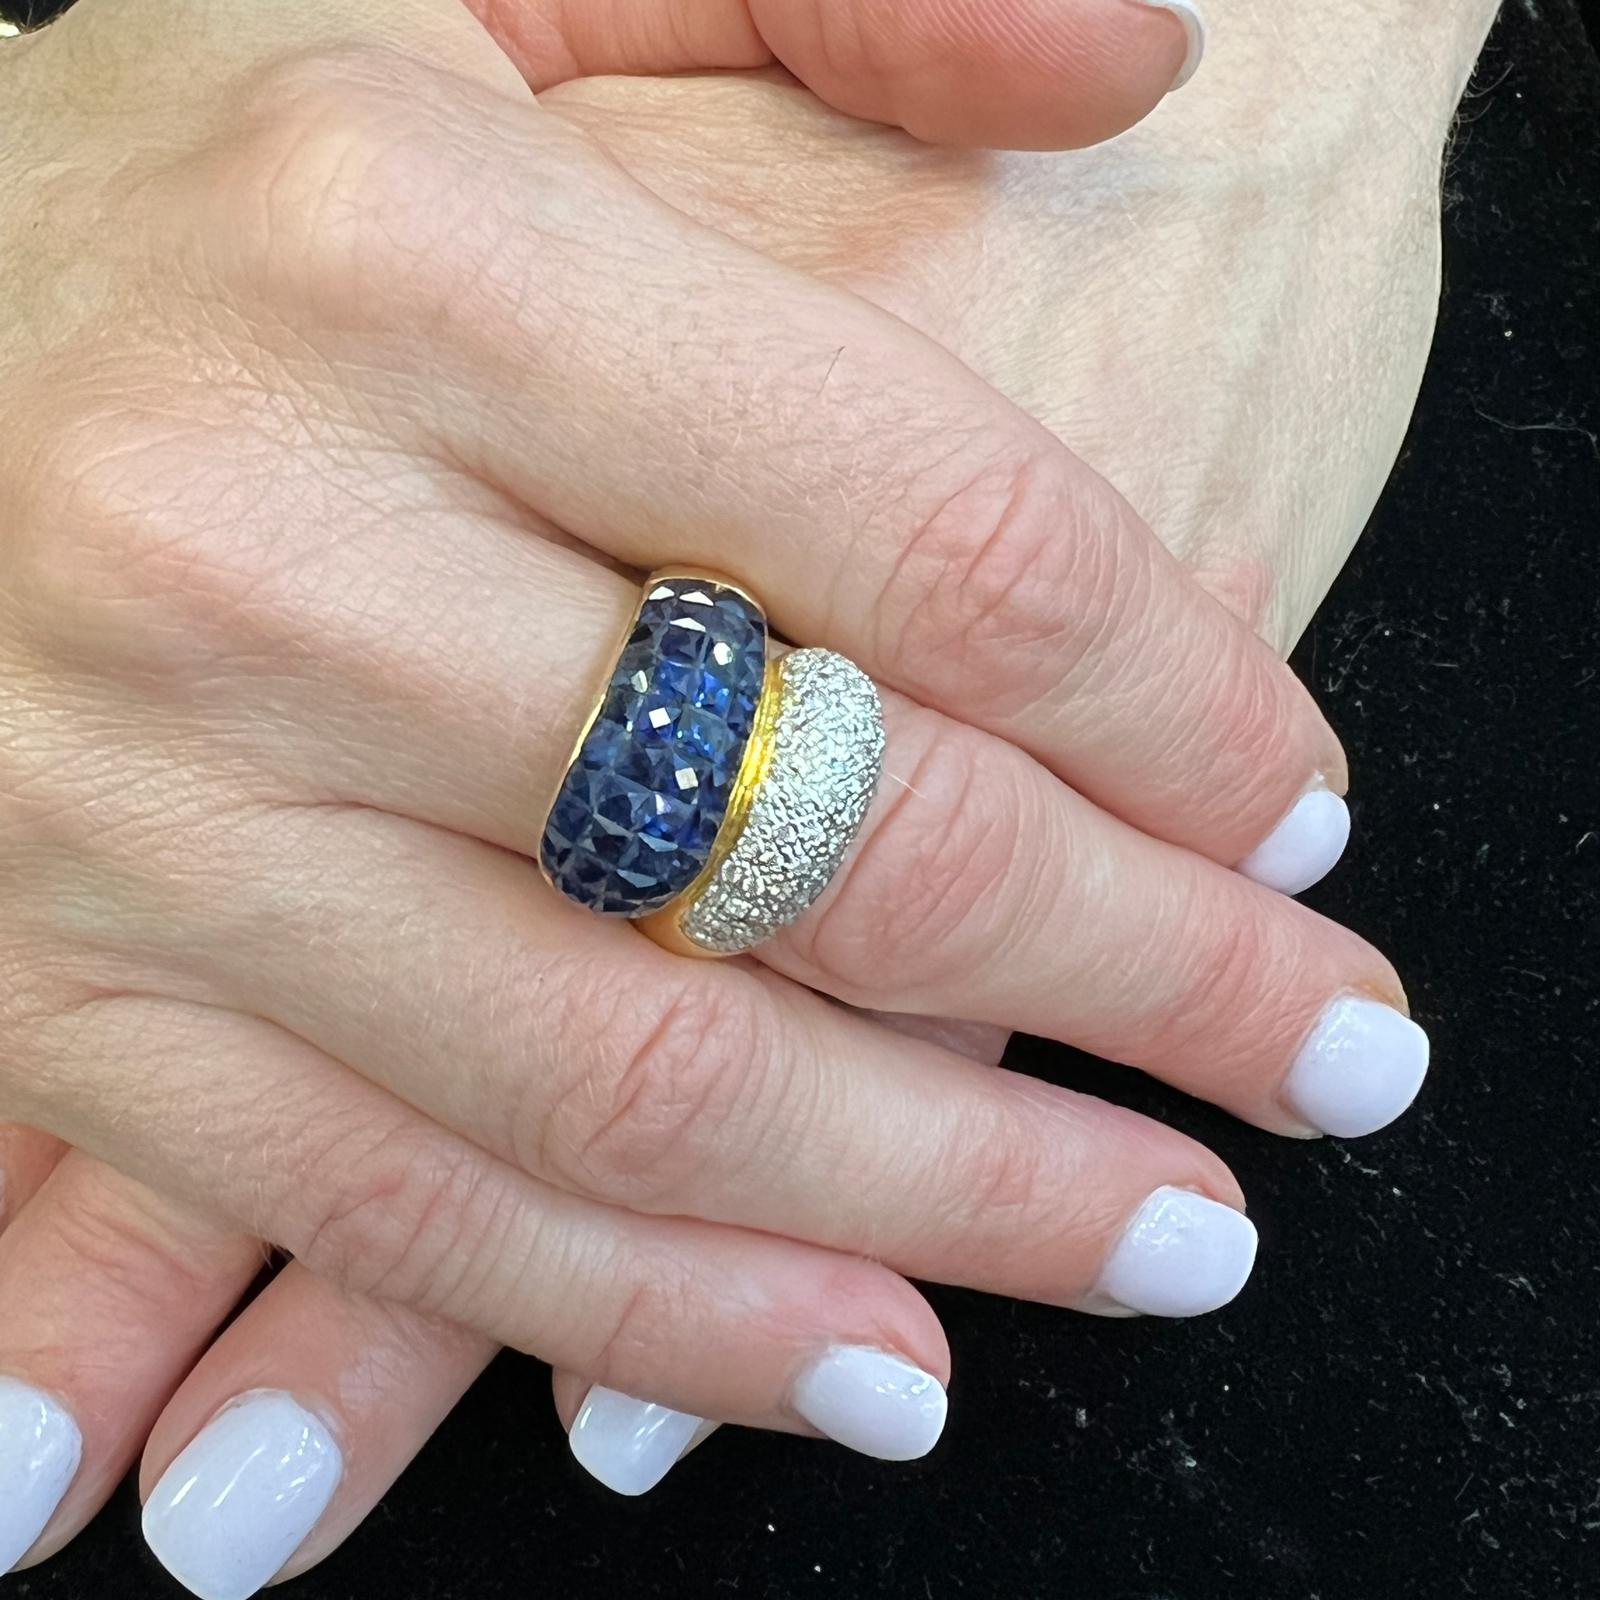 Diamond and sapphire bypass ring crafted in 18 karat yellow gold. The ring features round brilliant cut diamonds weighing approximately .64 carat total weight and graded H-I color and SI clarity. The 38 French cut natural blue sapphires weigh